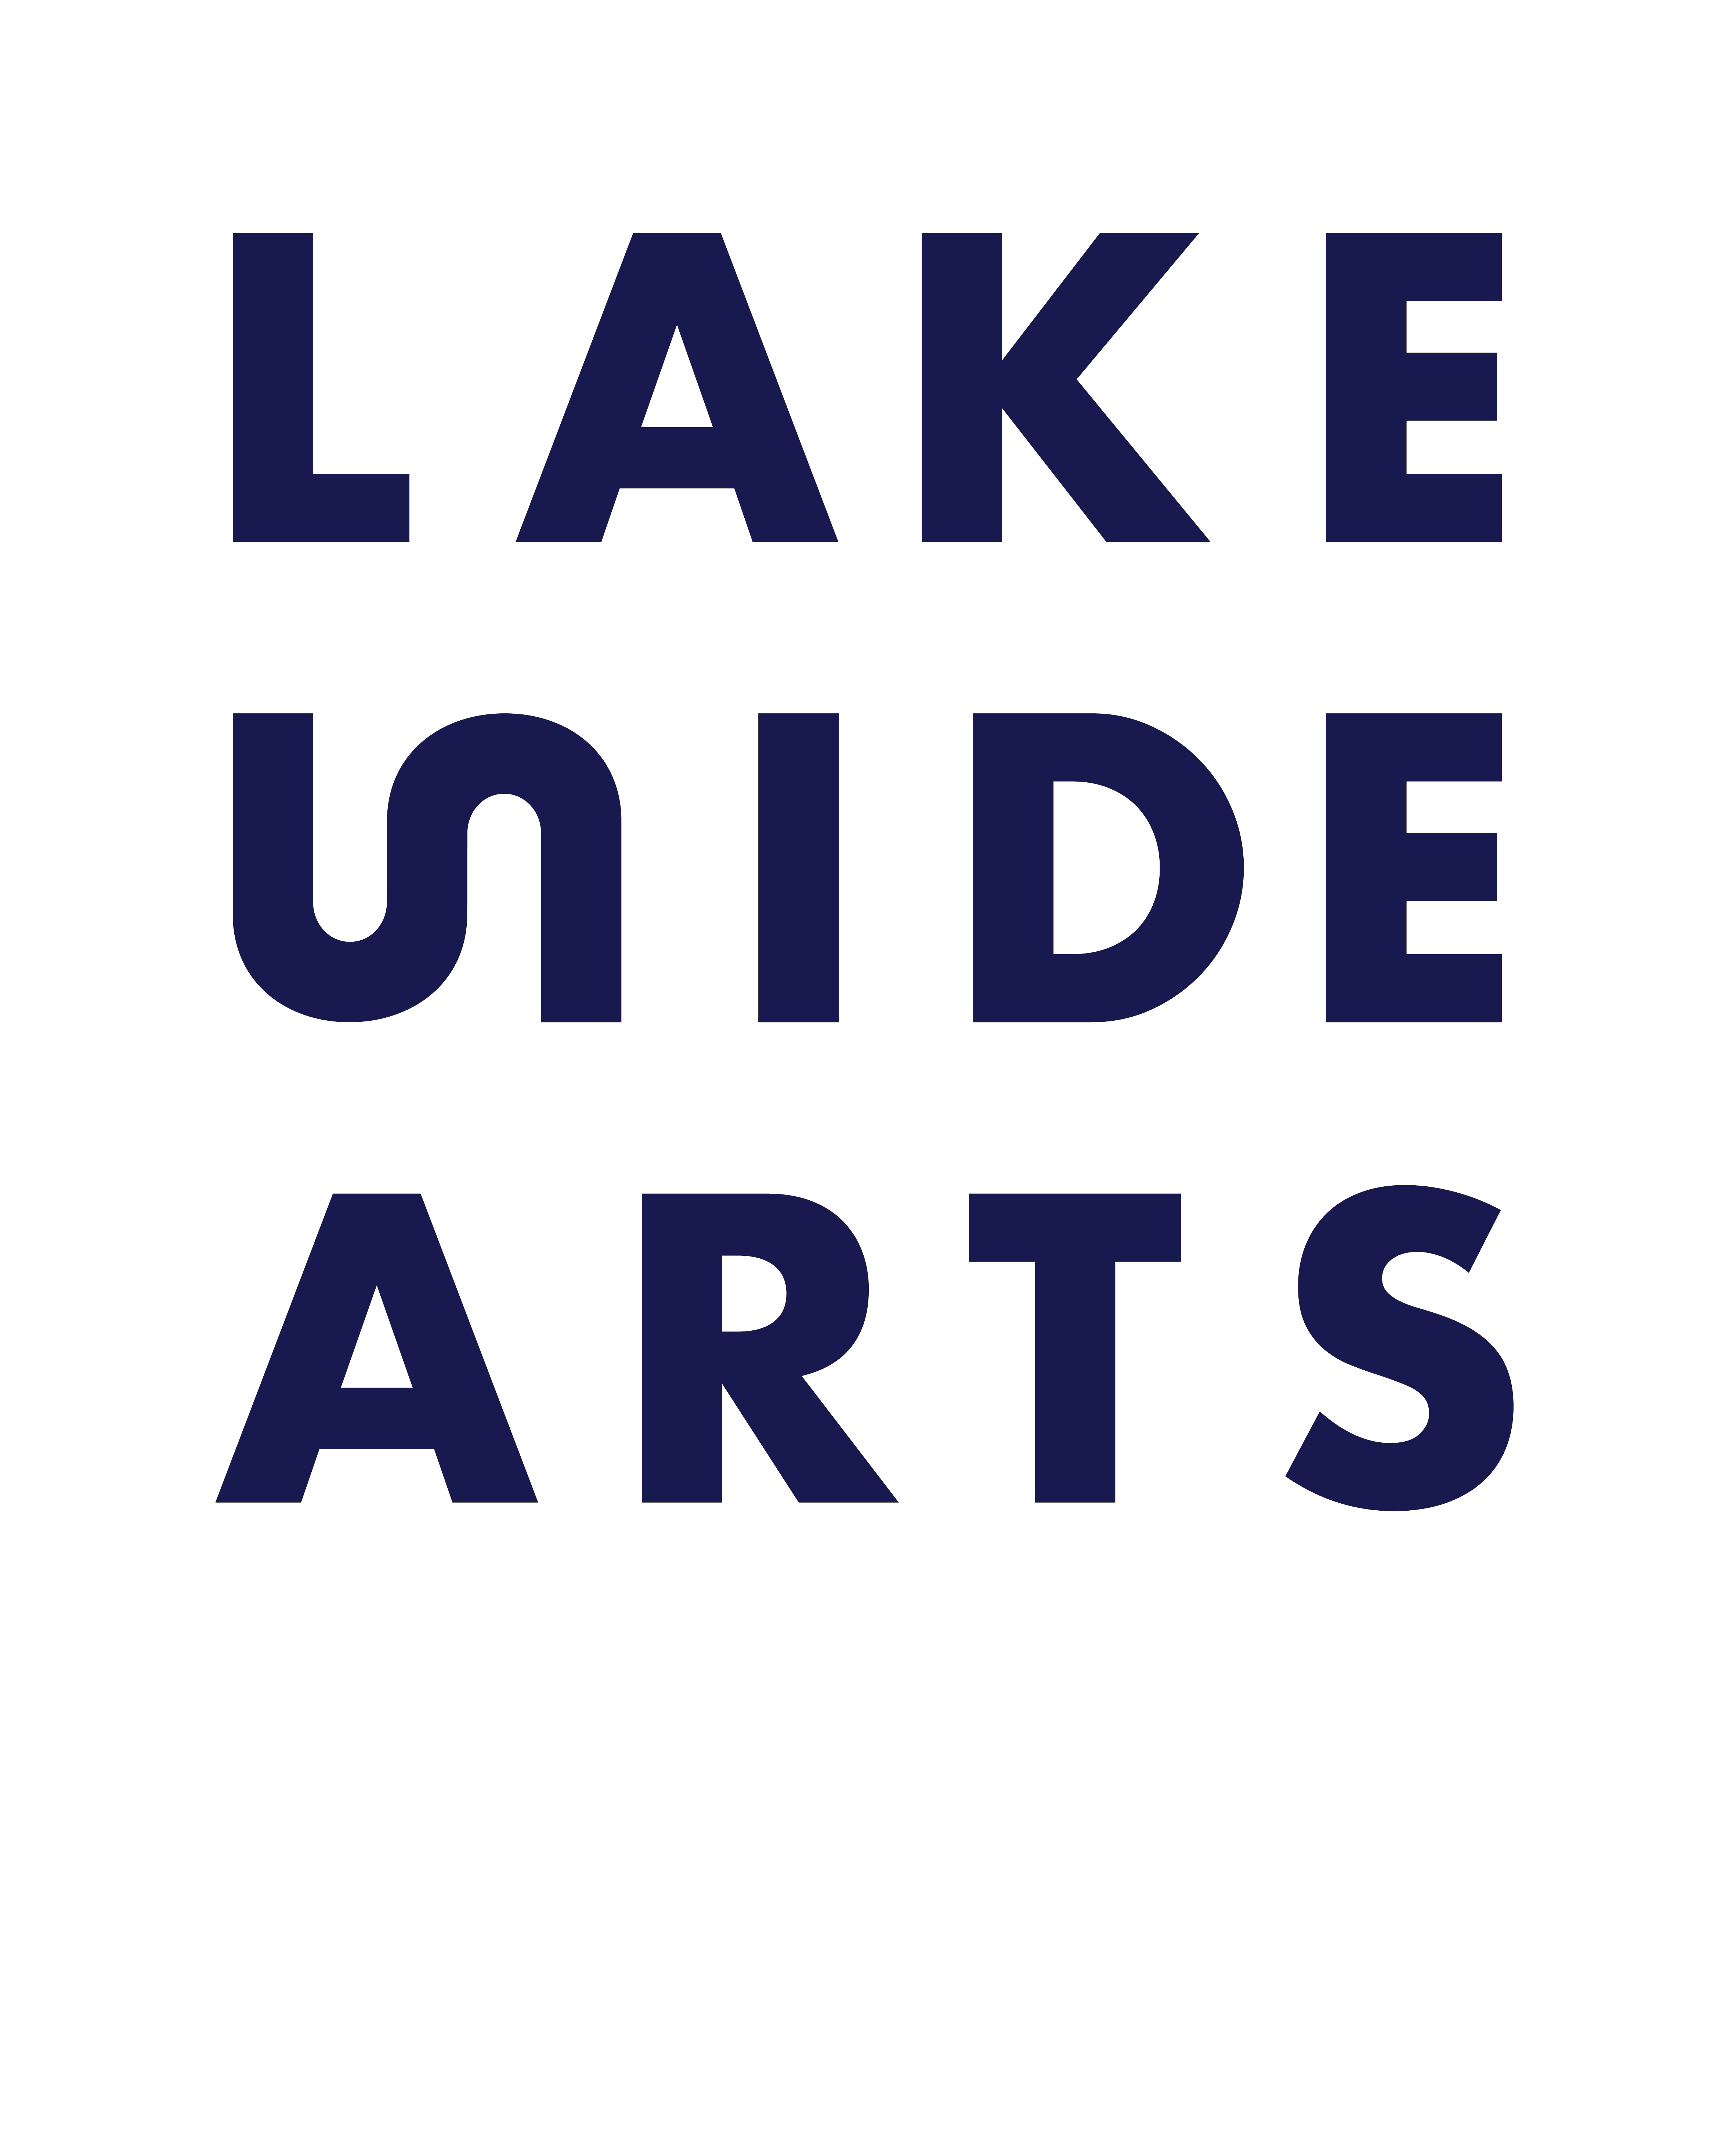 White digital banner with blue text with the inscription Lakeside Arts